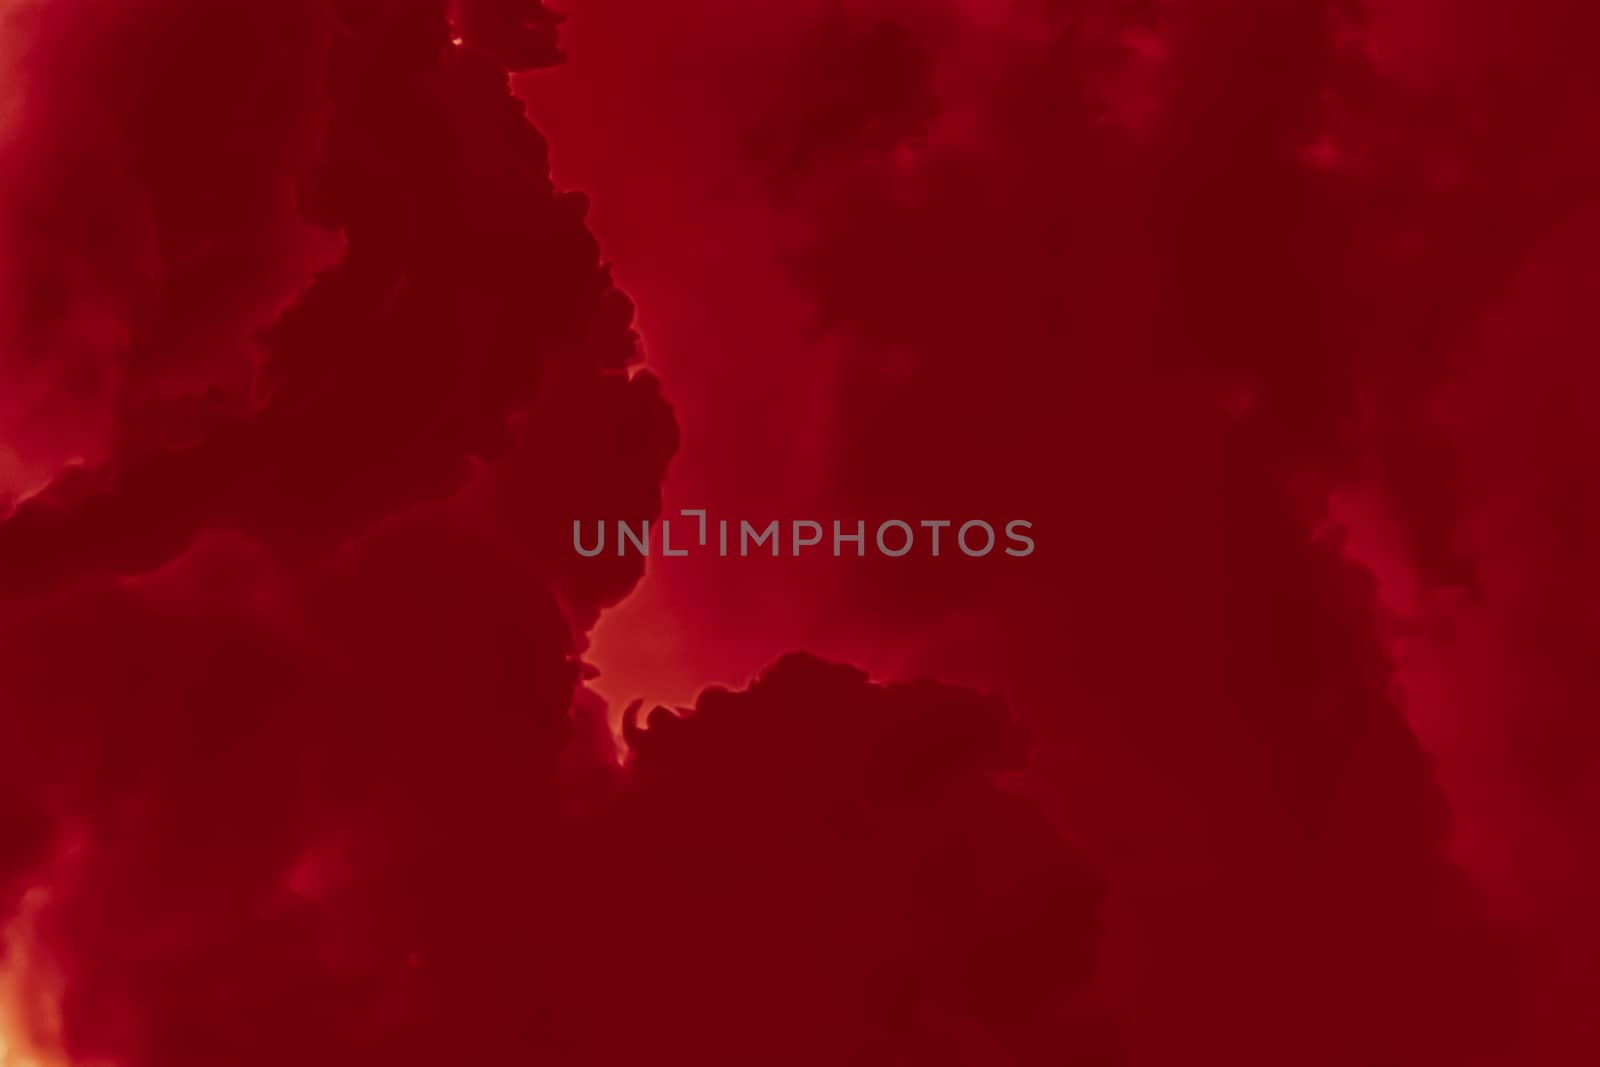 Hot fire flames or red clouds for minimalistic background design